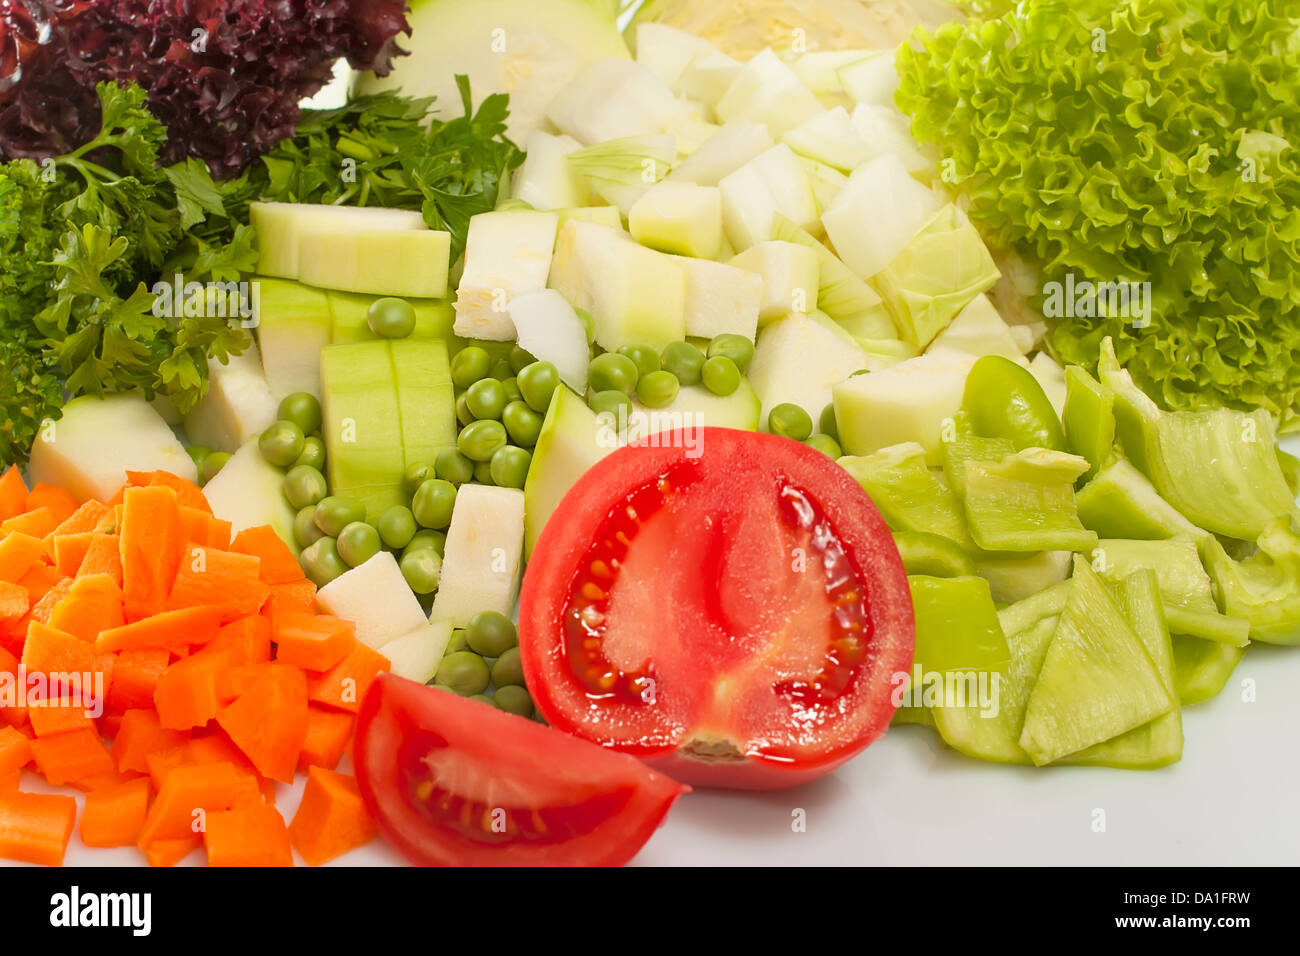 Chopped vegetables - Stock Image - H110/4342 - Science Photo Library